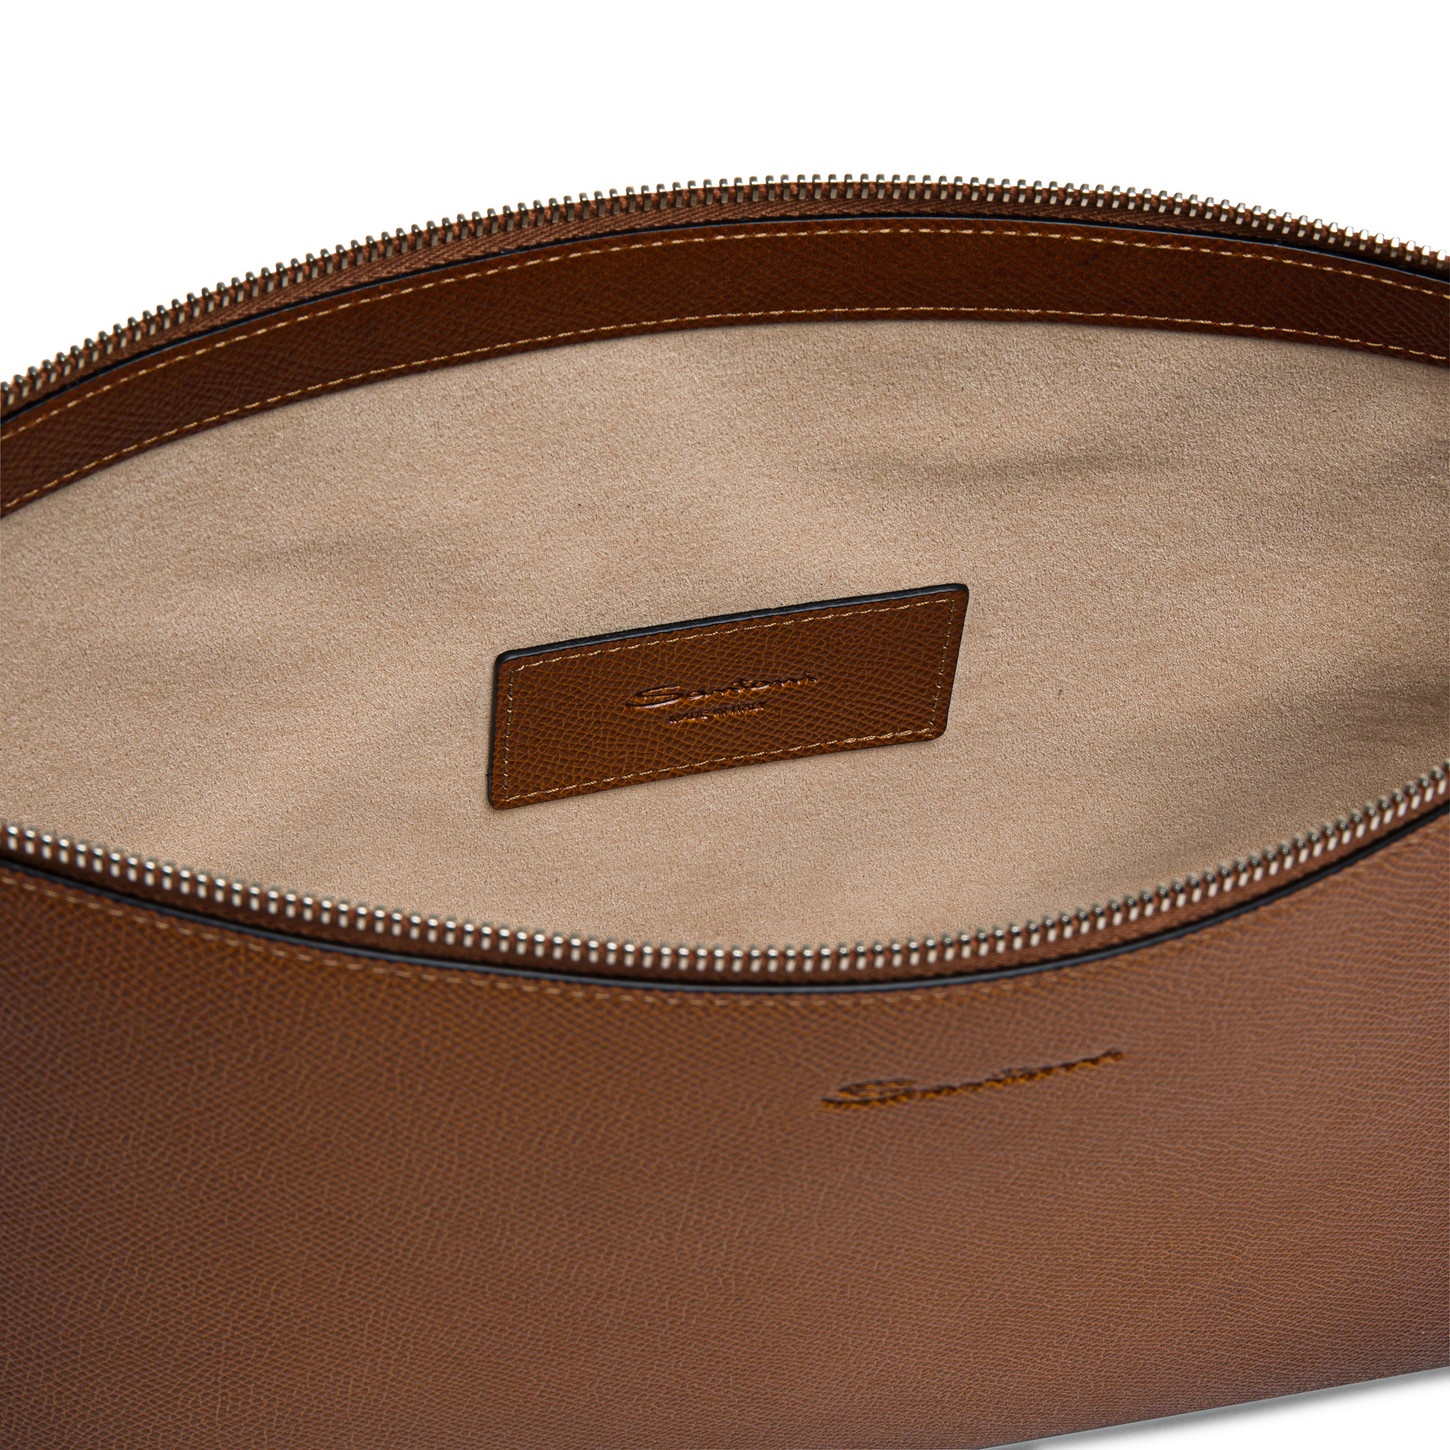 Brown saffiano leather pouch - 3